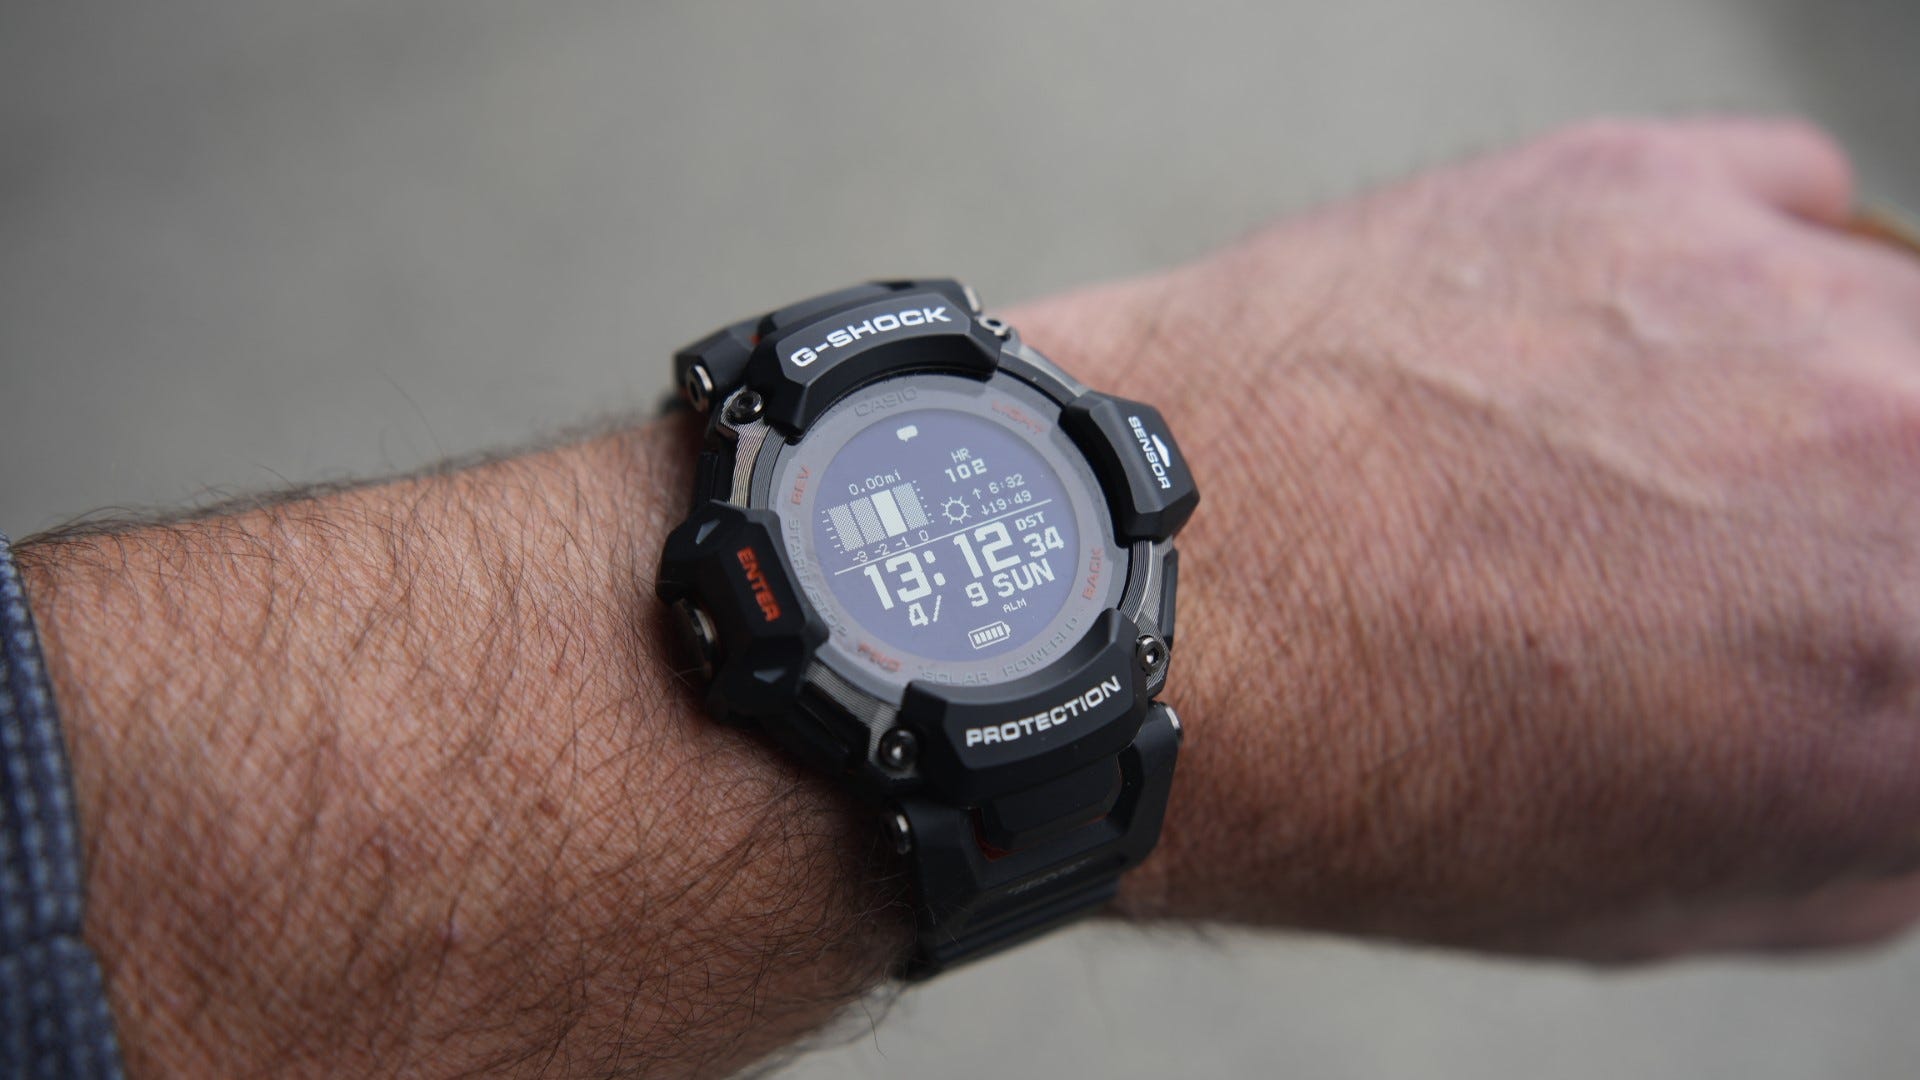 Casio G-SHOCK review: More just watch a GBD-H2000 than rugged Move